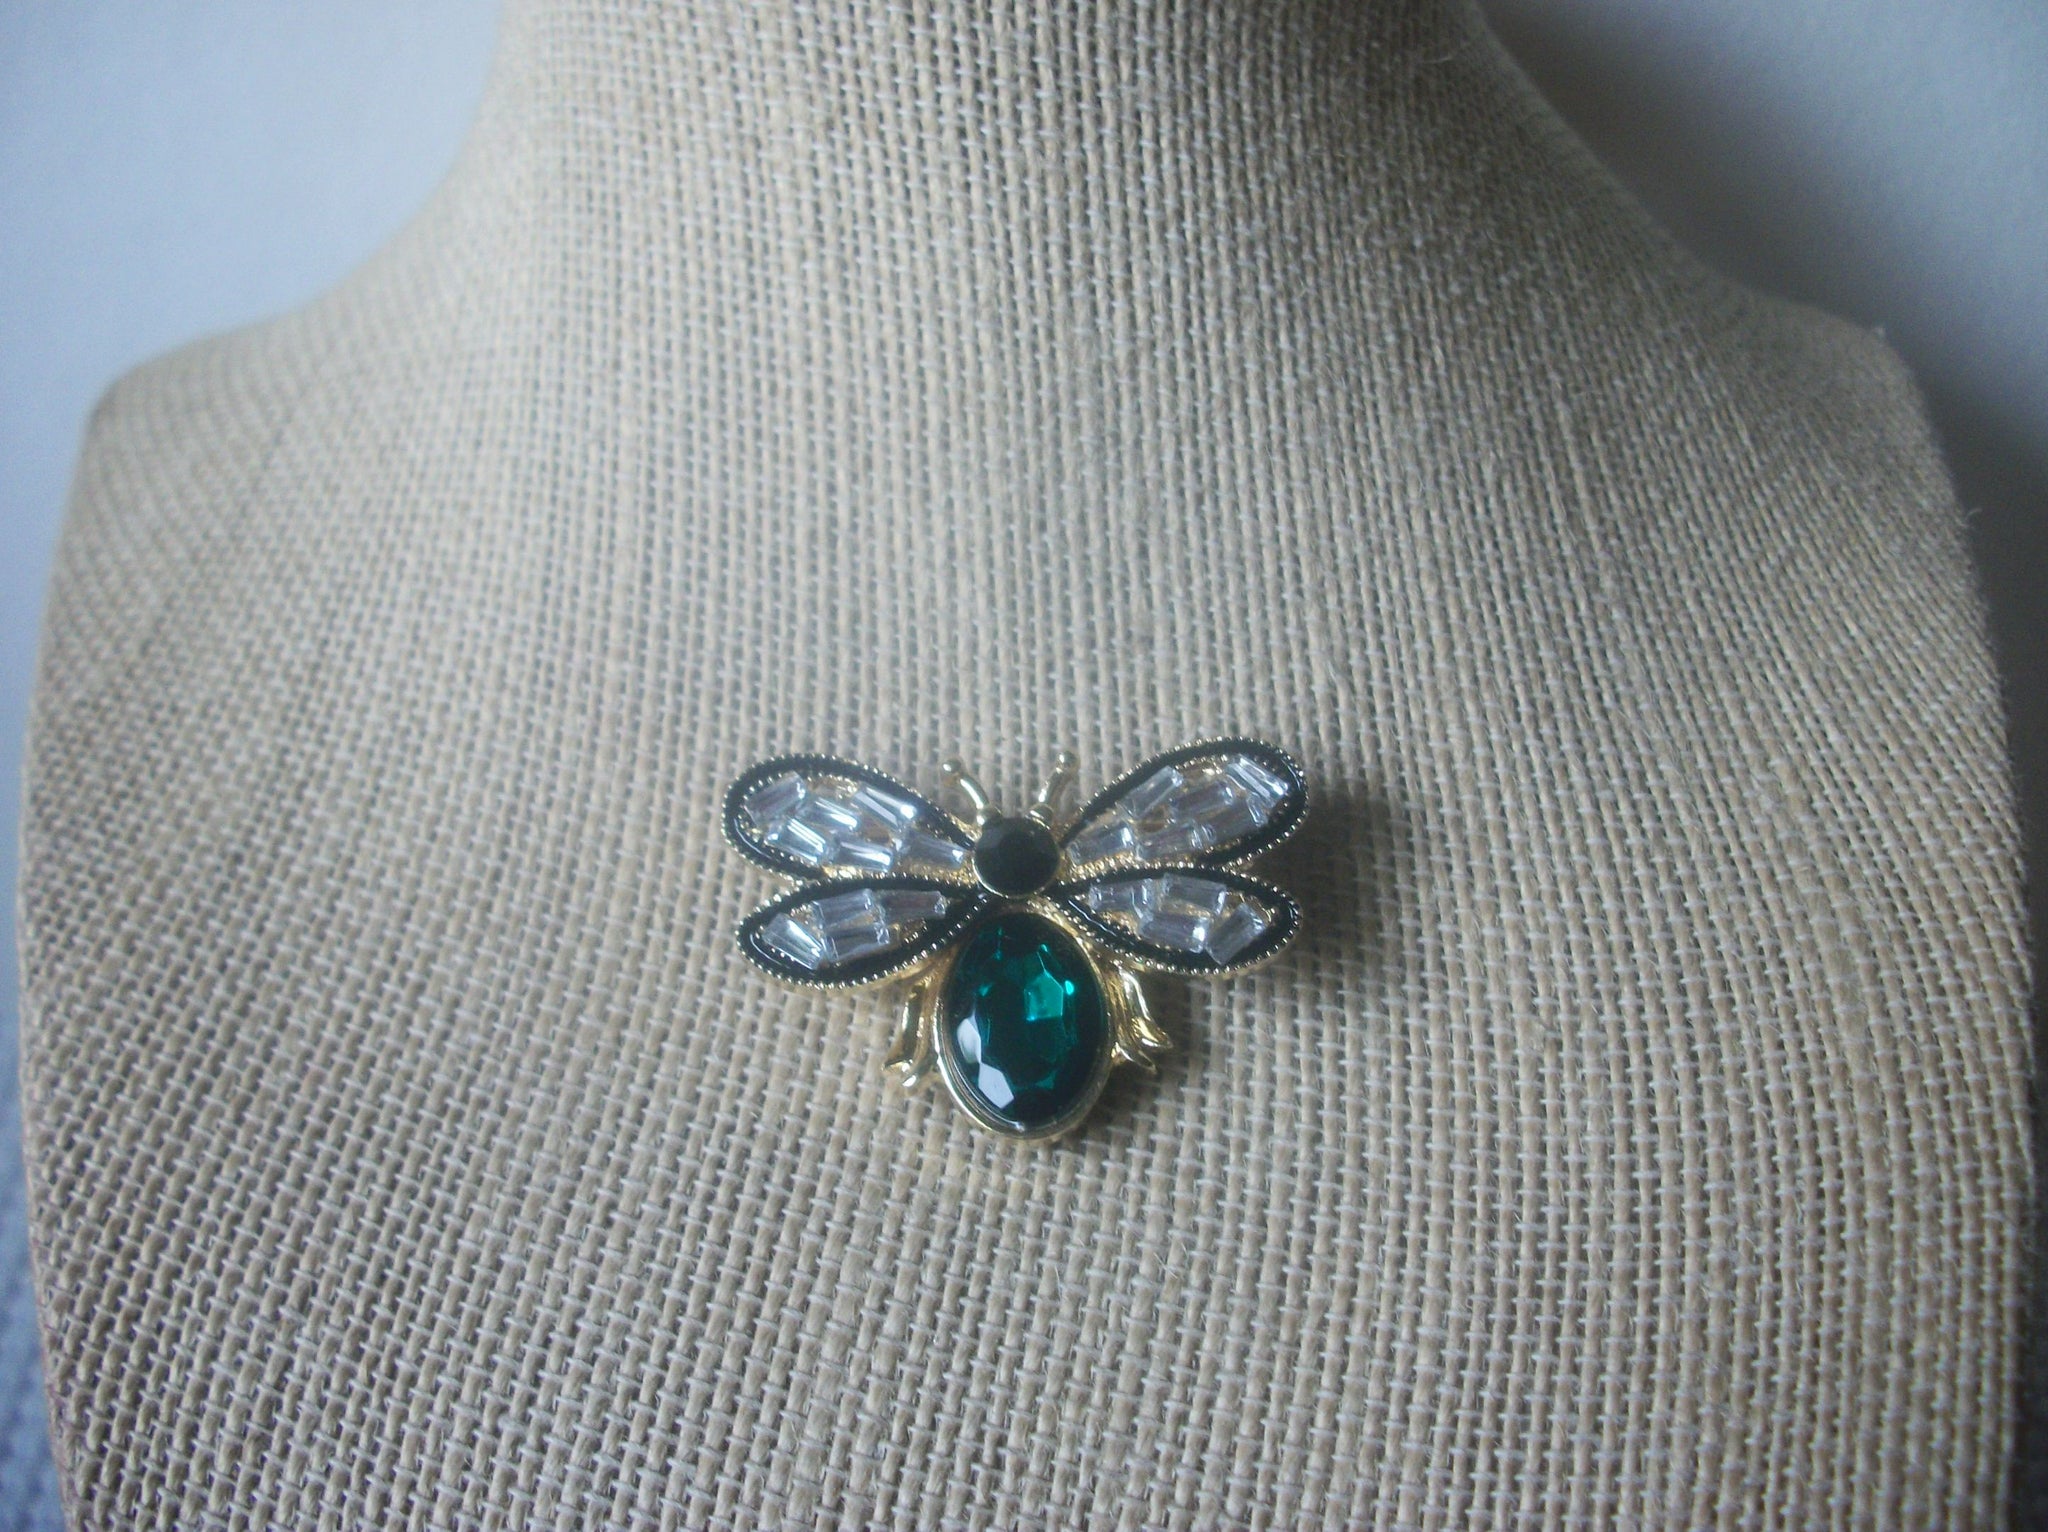 Vintage Brooch Pin Exquisite Honey  Bee Sparkling Clear Rhinestones, Green Glass Gold Tone, 023021